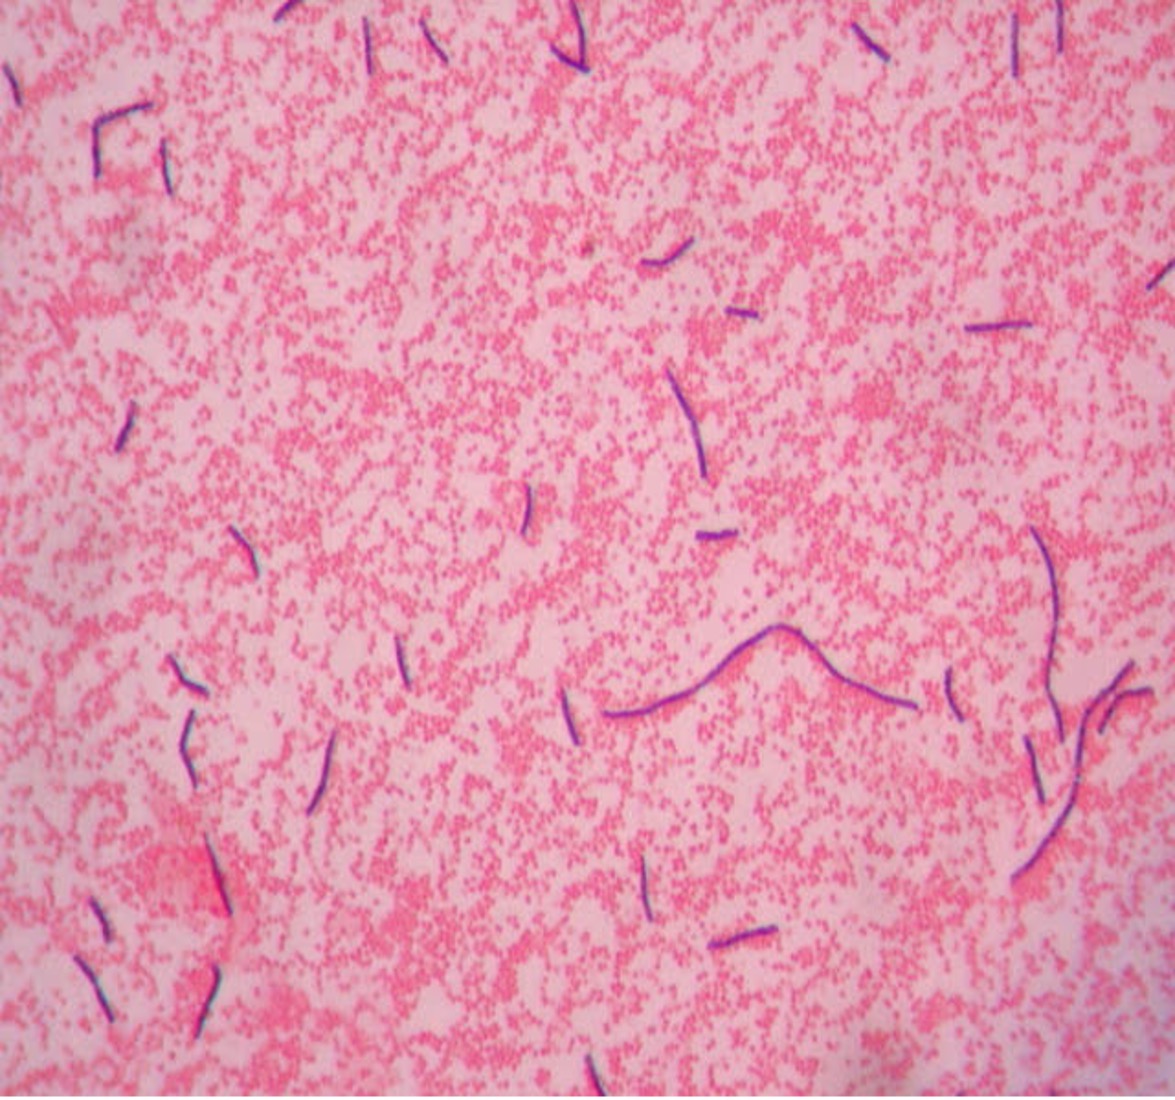 pink round cells mixed with purple rods